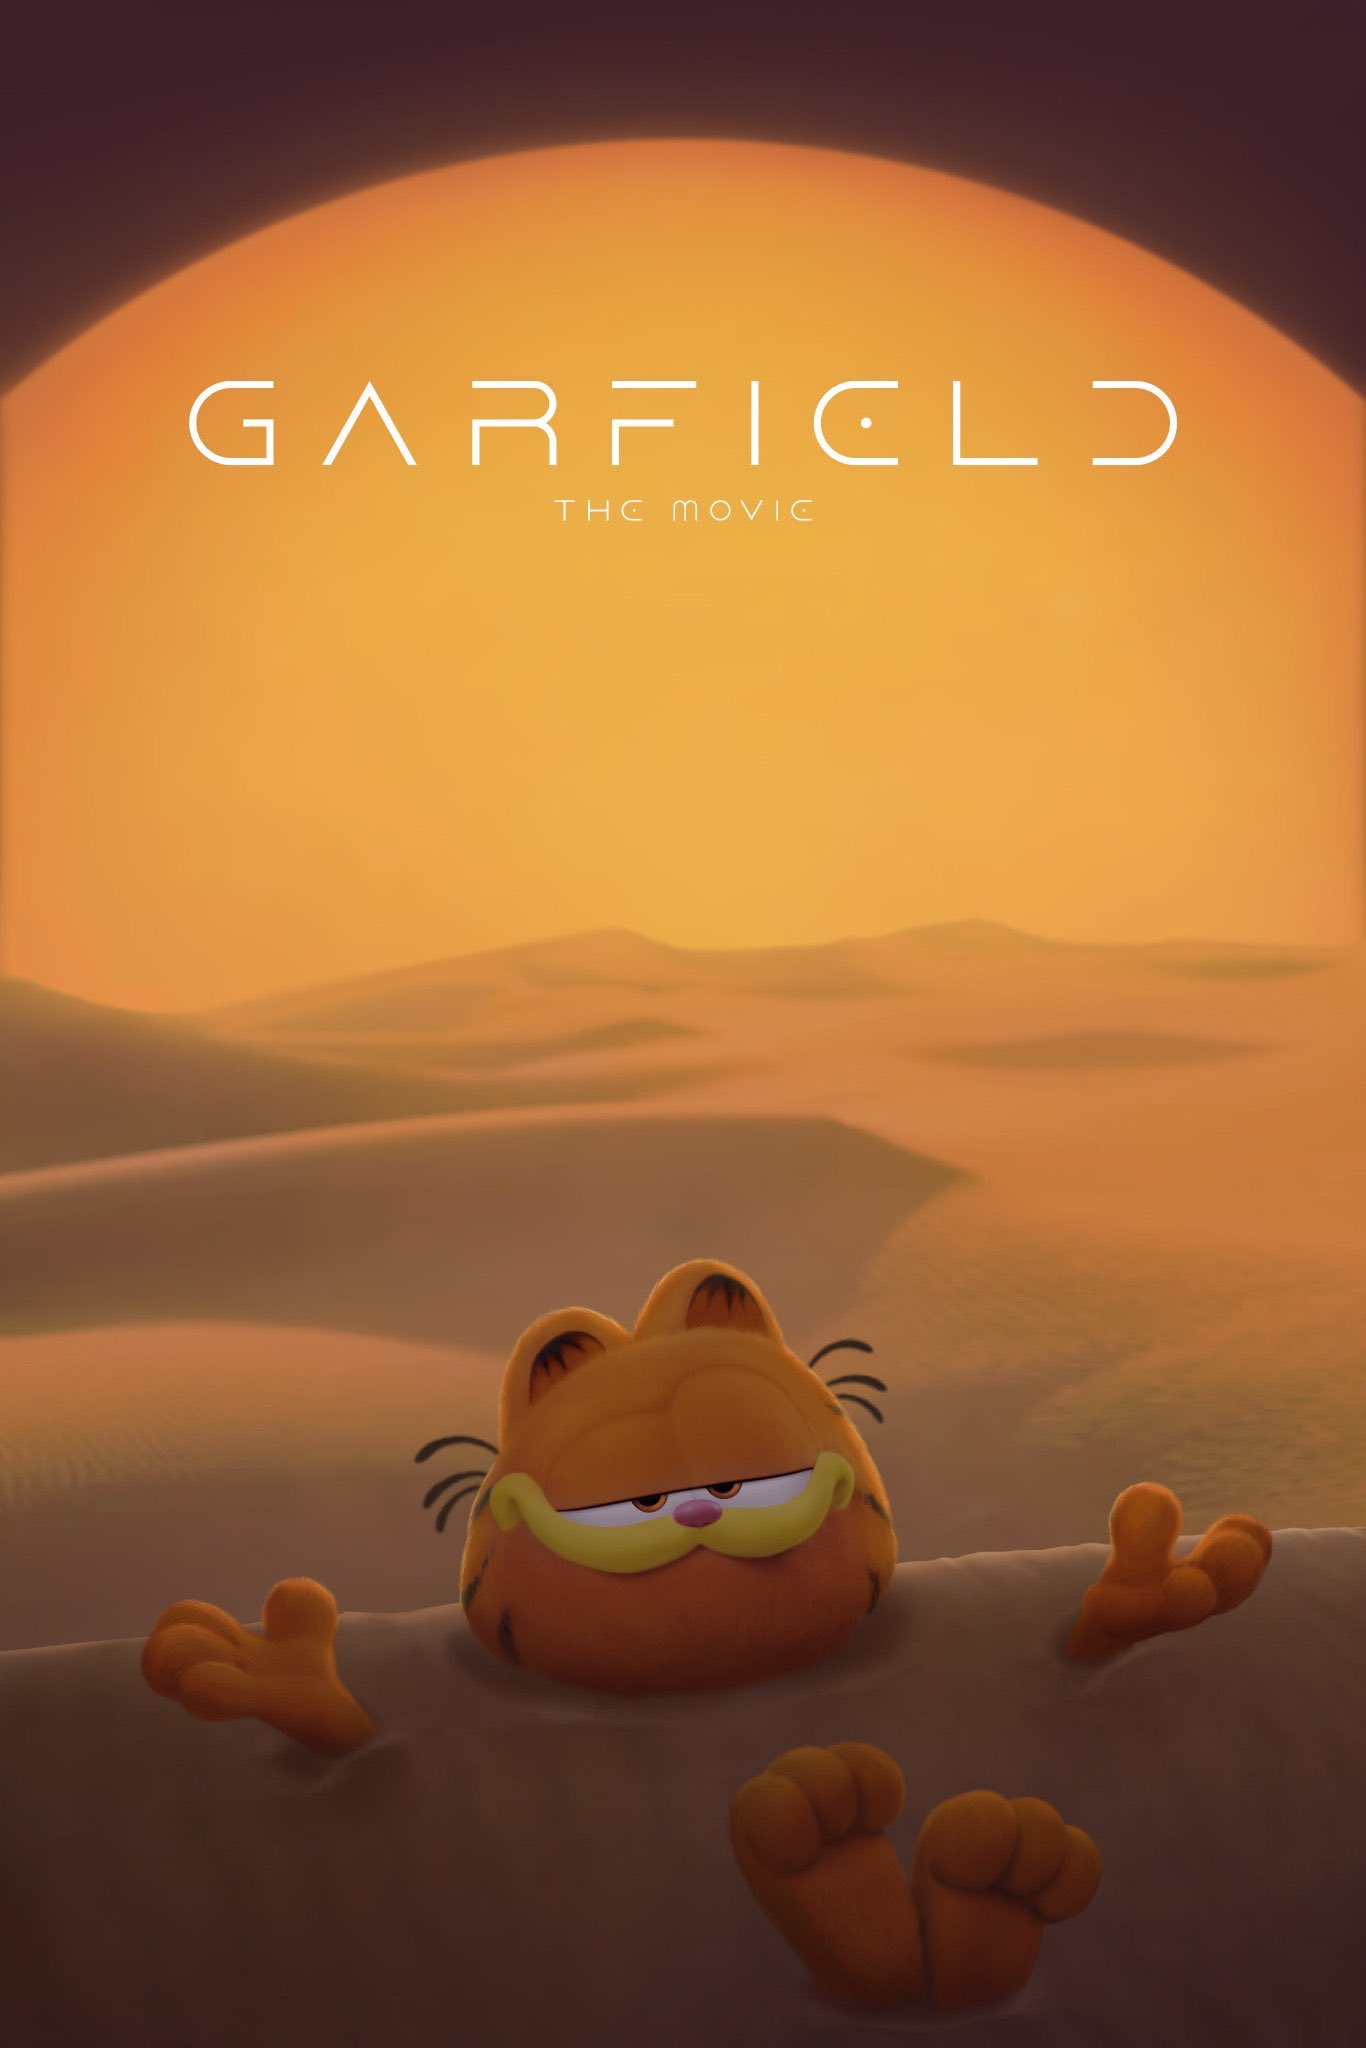 Dune inspired poster for Garfield: The Movie